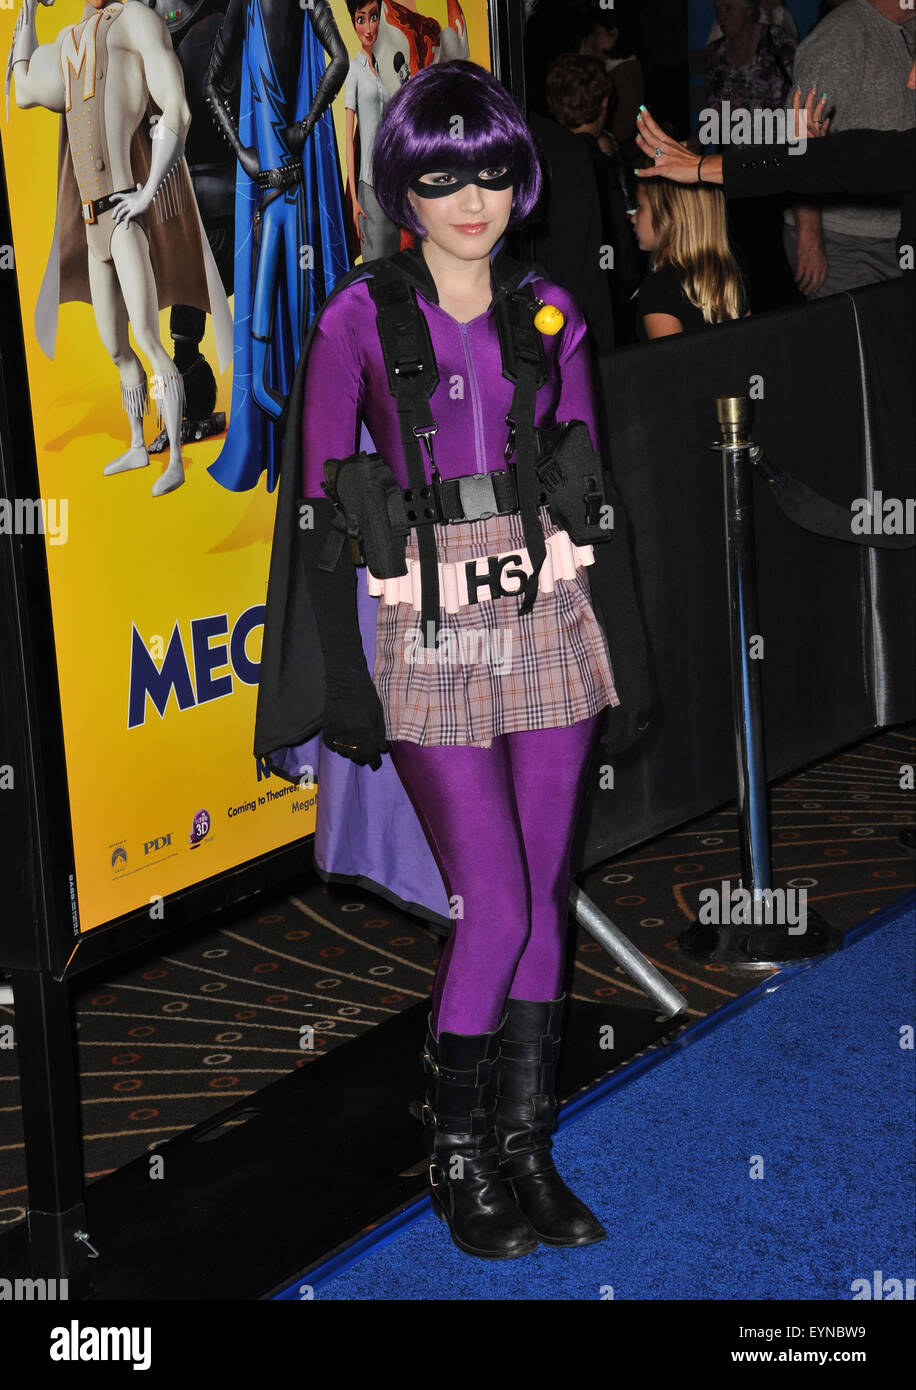 LOS ANGELES, CA - OCTOBER 30, 2010: Erin Sanders at the Los Angeles premiere of 'MegaMind' at Mann's Chinese Theatre, Hollywood. Stock Photo